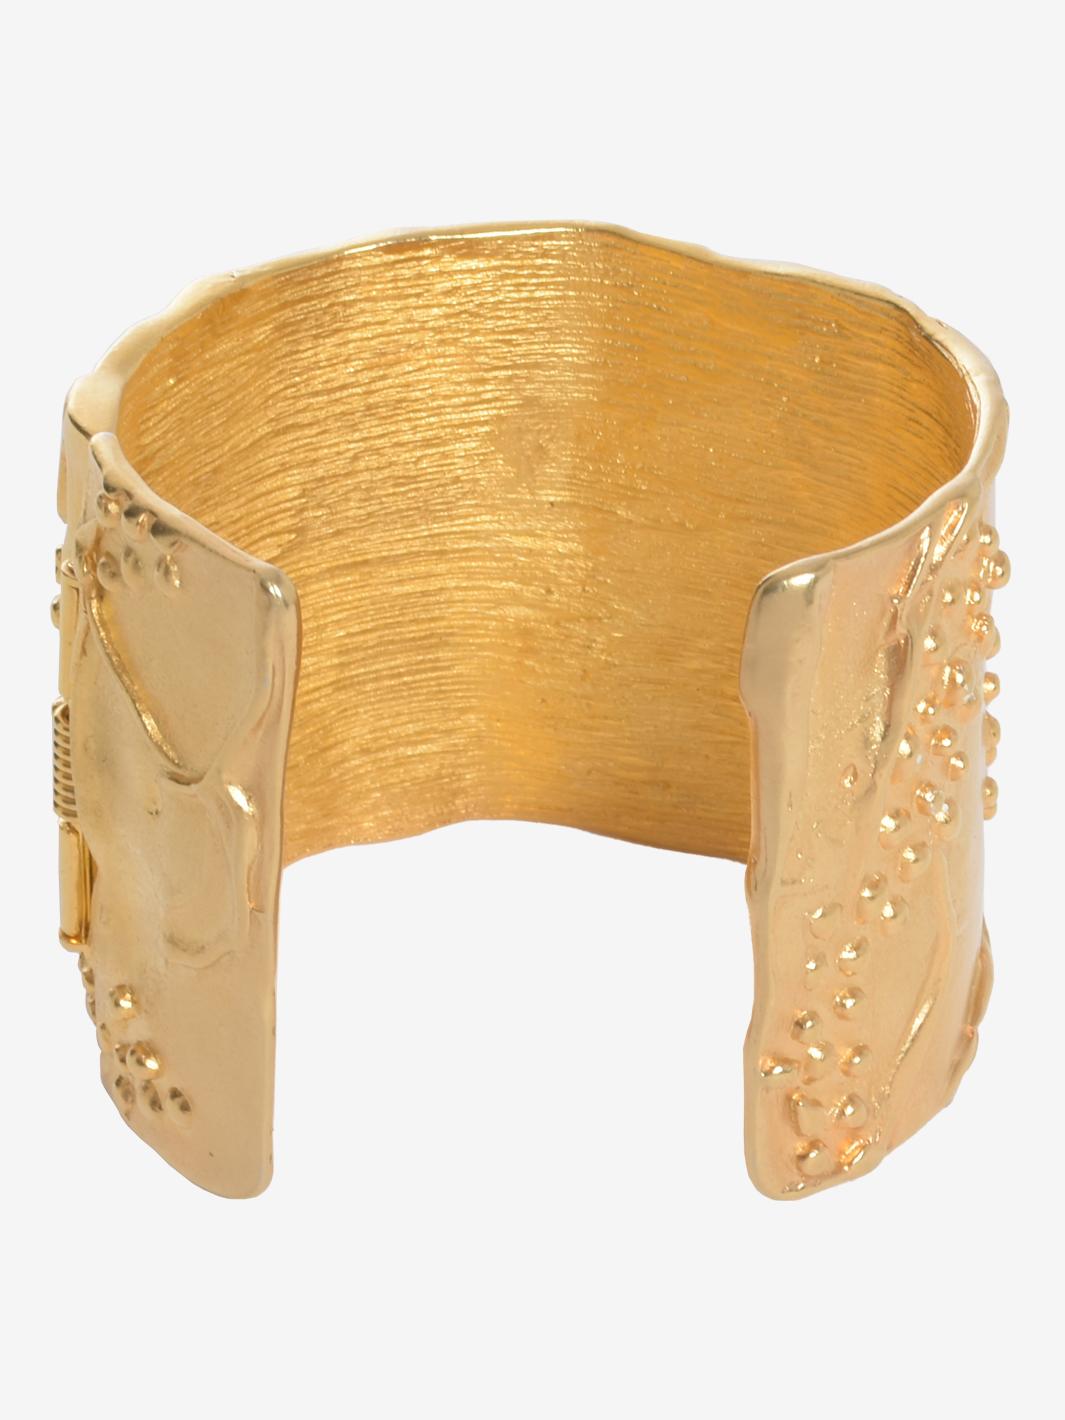 Kenneth Jay Lane Gold Large Rigid Band Bracelet With Rhinestones is a unique design much appreciated by Diana Vreeland, which Lane had created for her. White rhinestones on cast American pewter plated hamilton gold polished and satin finish.

STATE